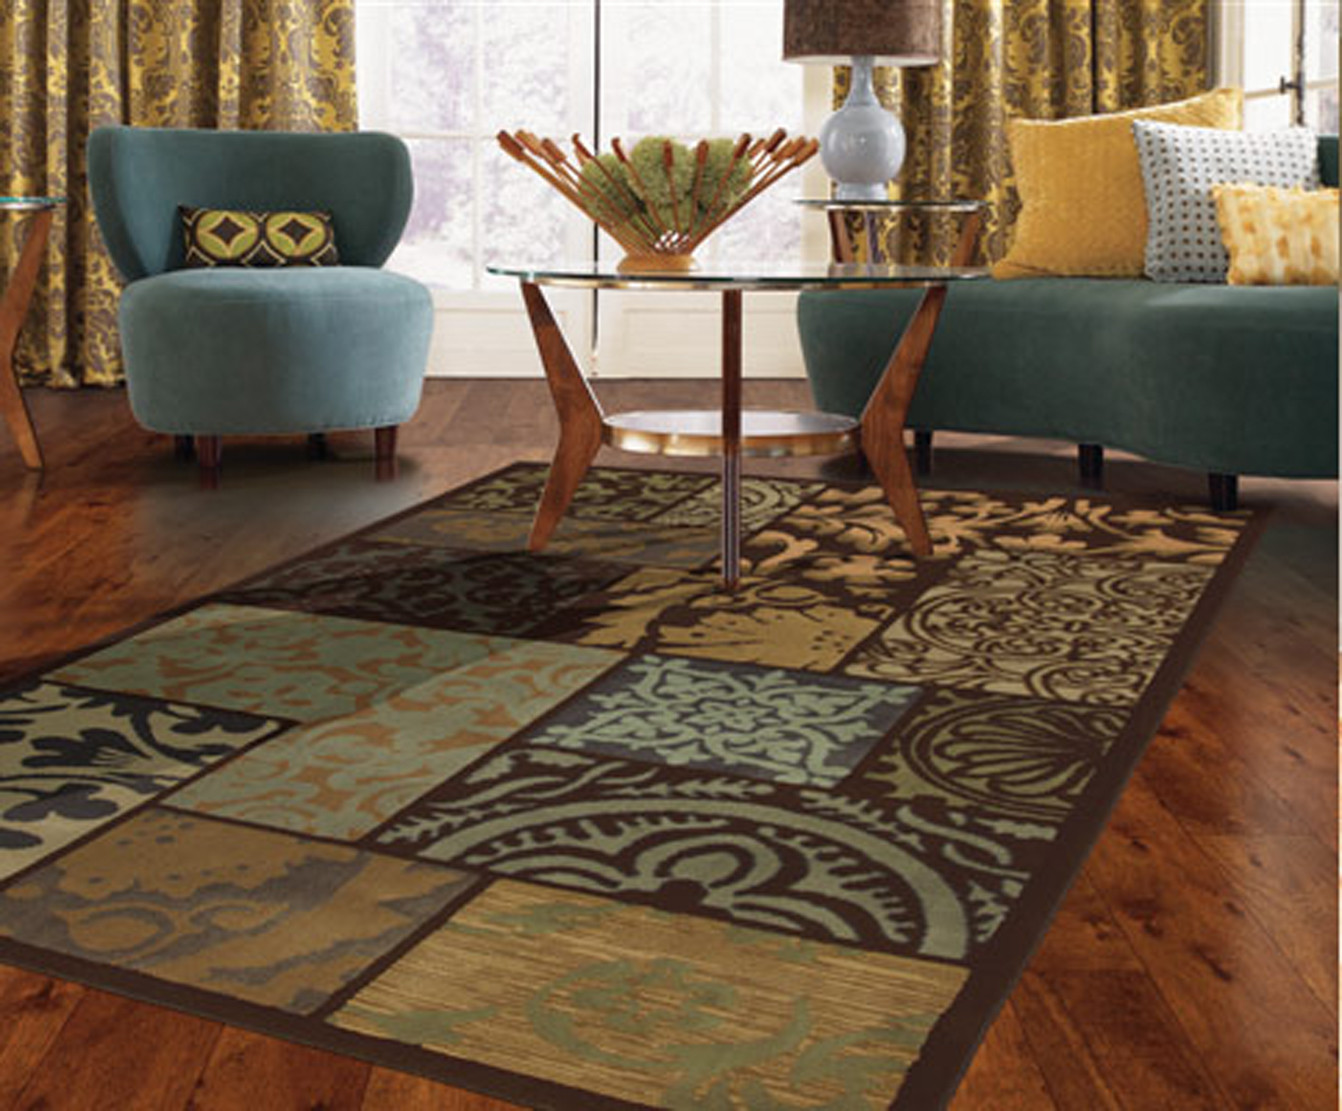 Unique Rugs For Living Room
 Colorful Area Rugs Unique Rugs For The Living Room